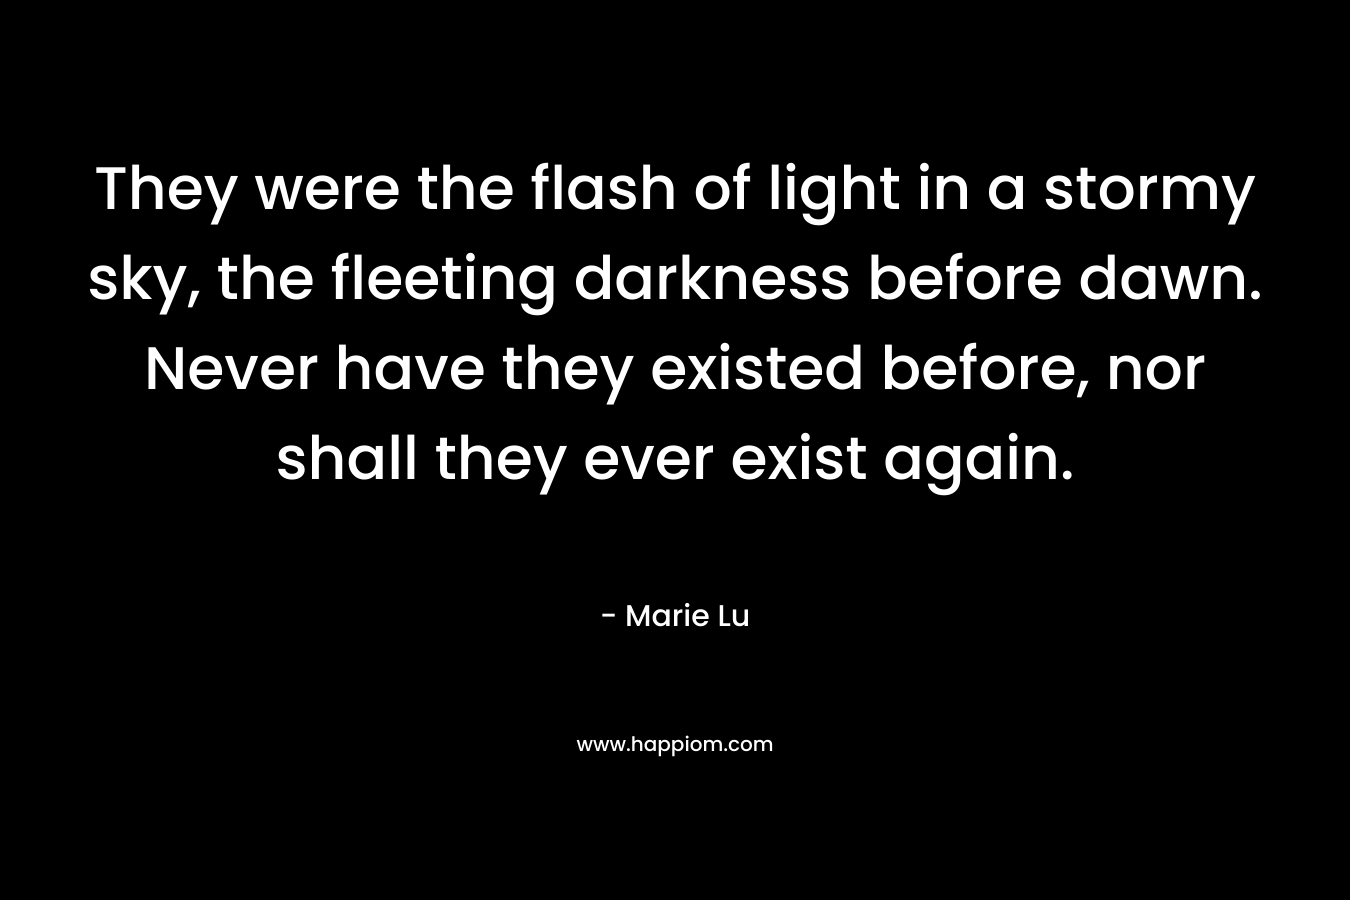 They were the flash of light in a stormy sky, the fleeting darkness before dawn. Never have they existed before, nor shall they ever exist again. – Marie Lu